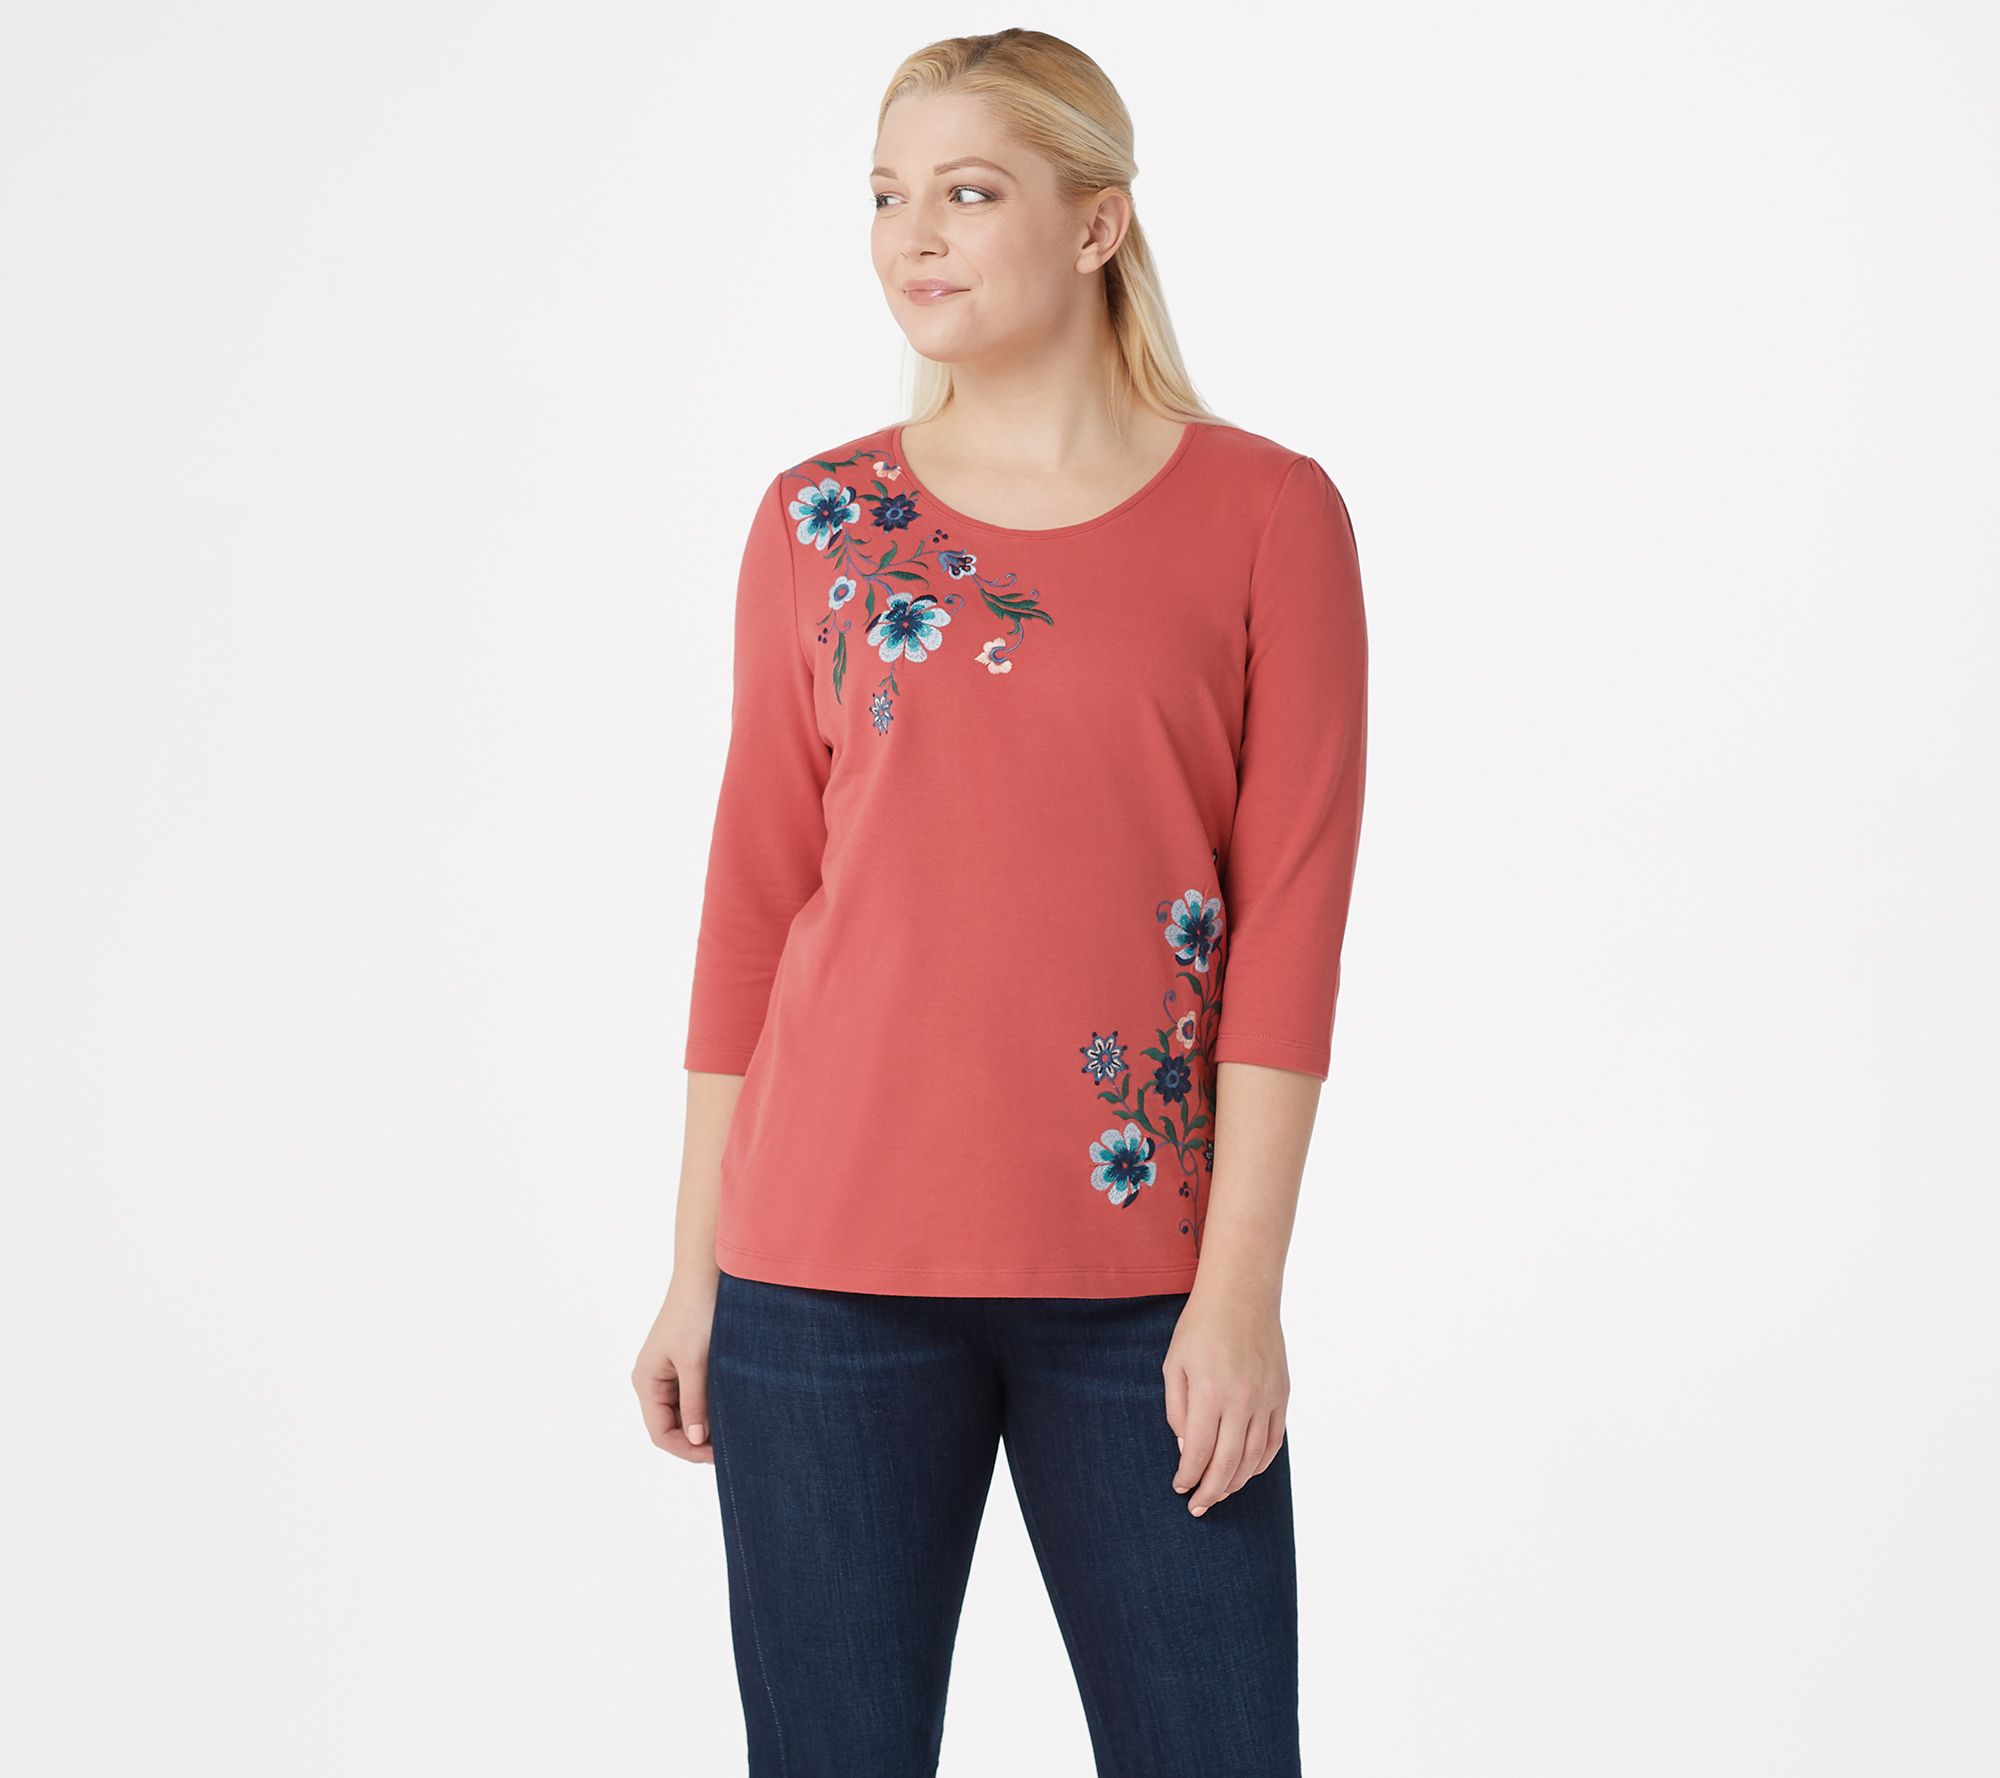 Denim & Co. French Terry 3/4-Sleeve Top with Embroidery - QVC.com